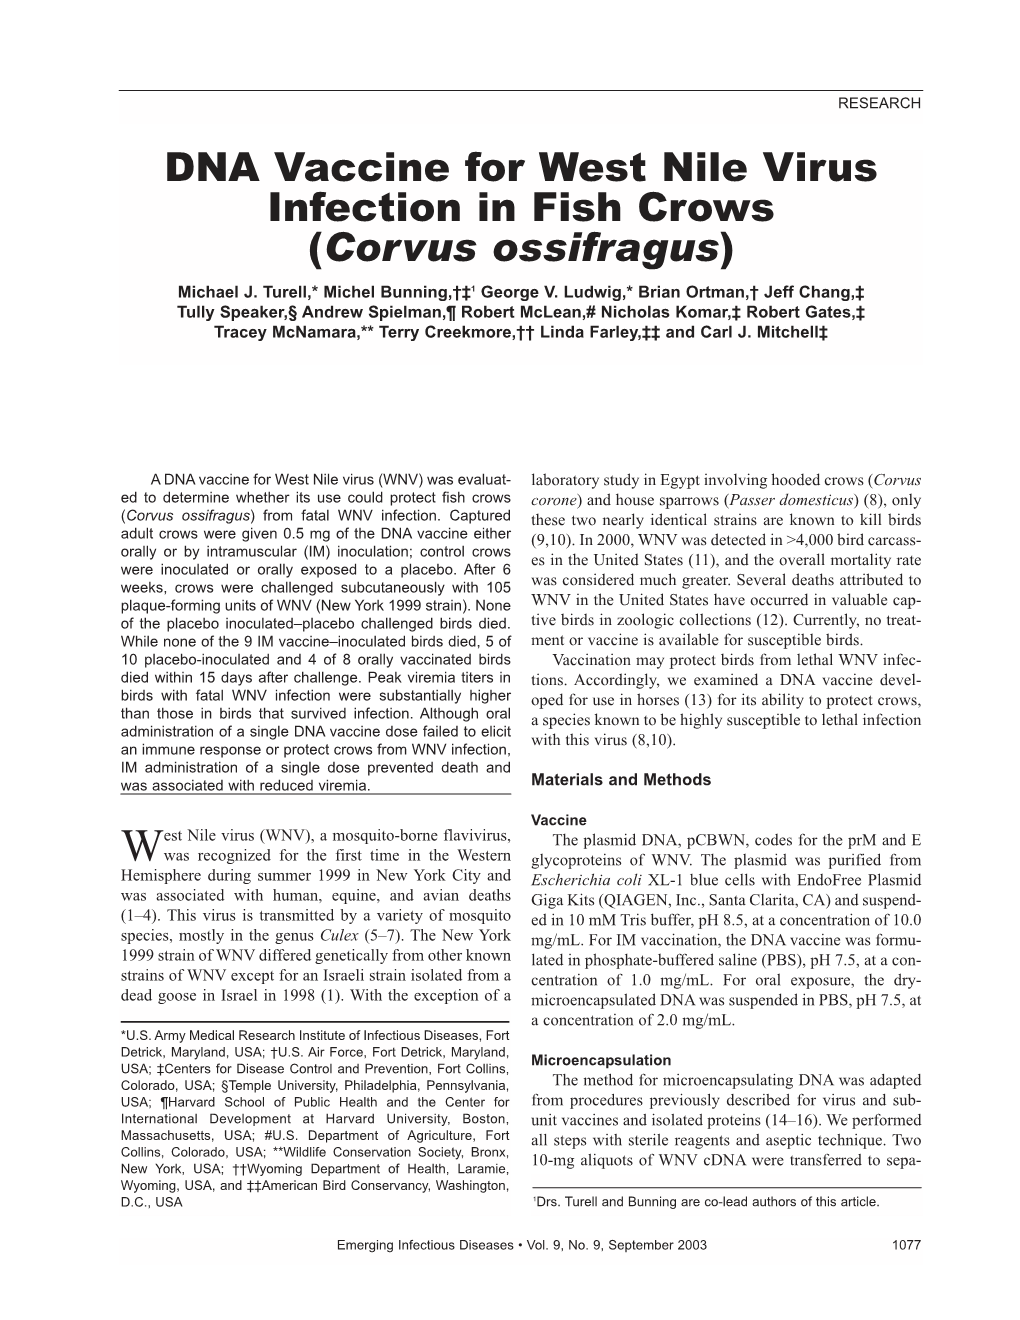 DNA Vaccine for West Nile Virus Infection in Fish Crows (Corvus Ossifragus) Michael J